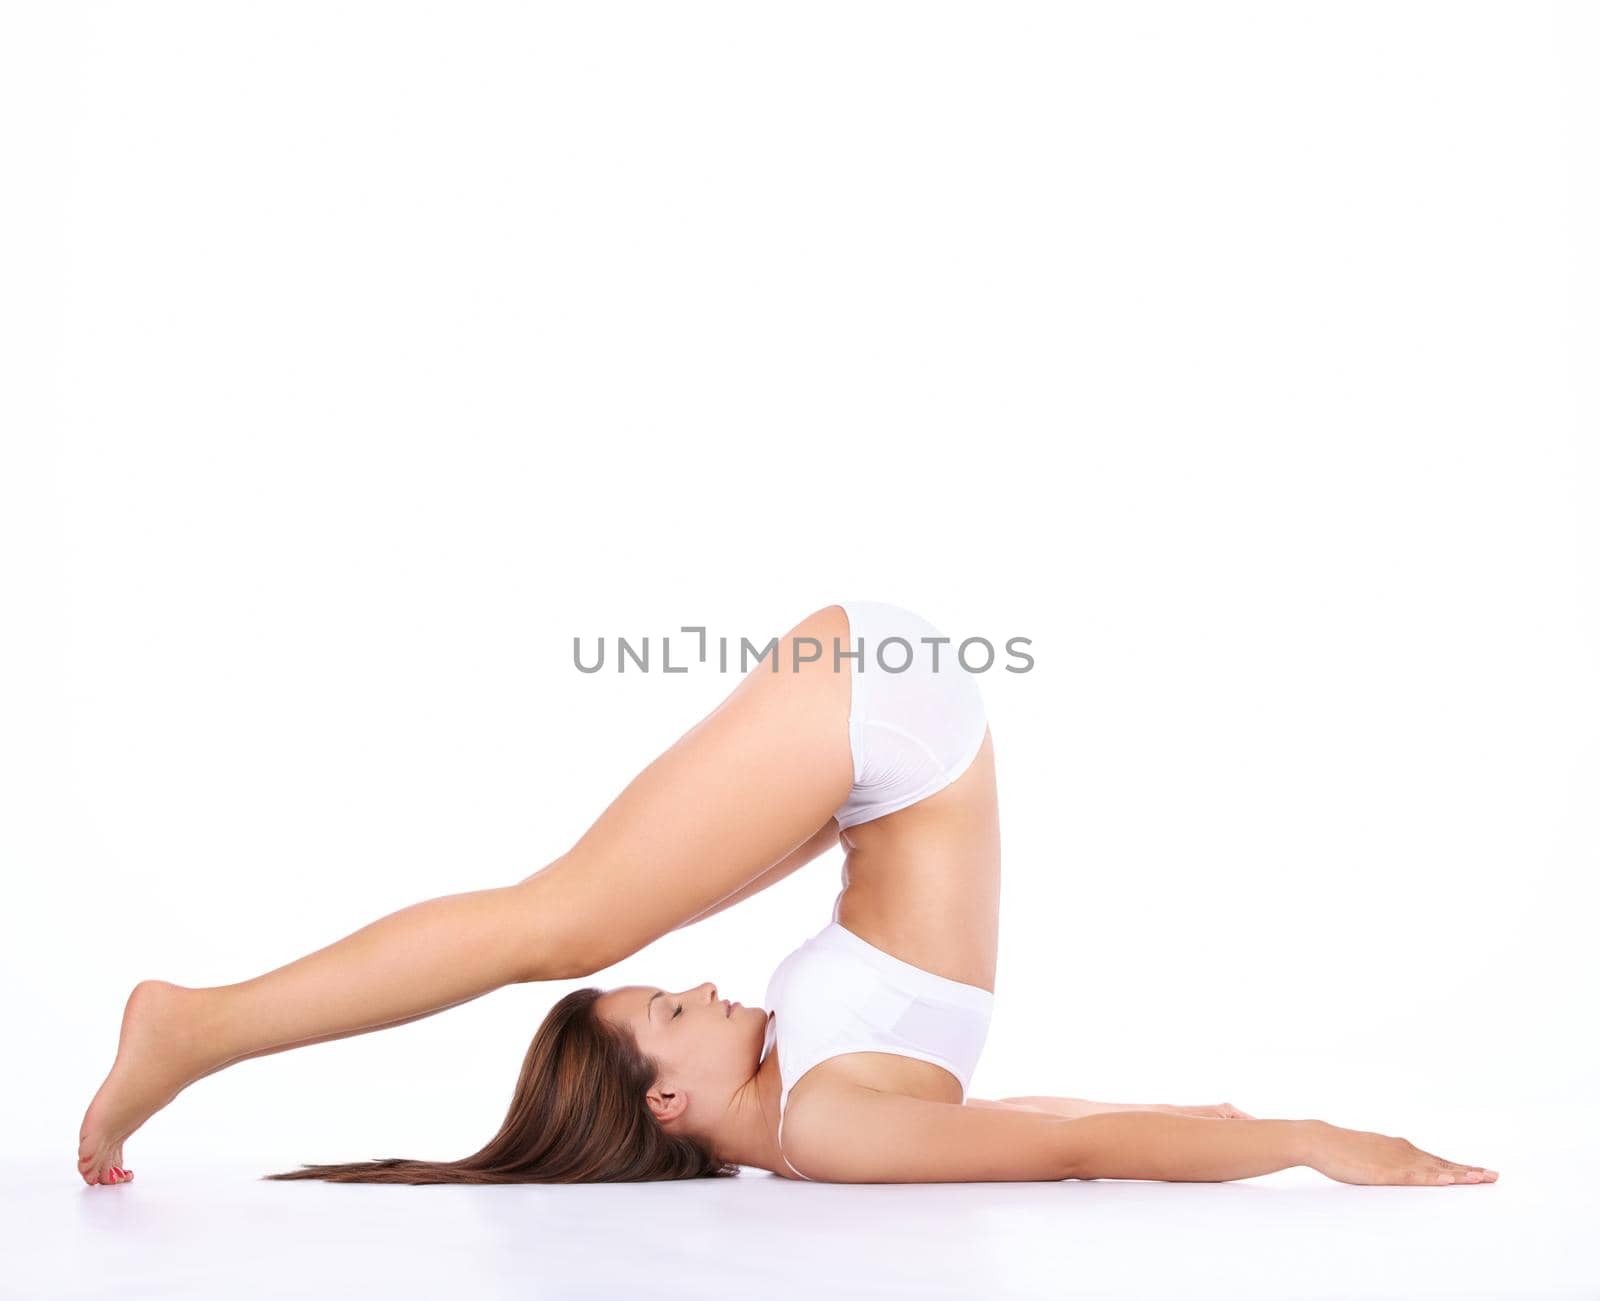 Studio shot of a young woman in underwear stretching isolated on white.